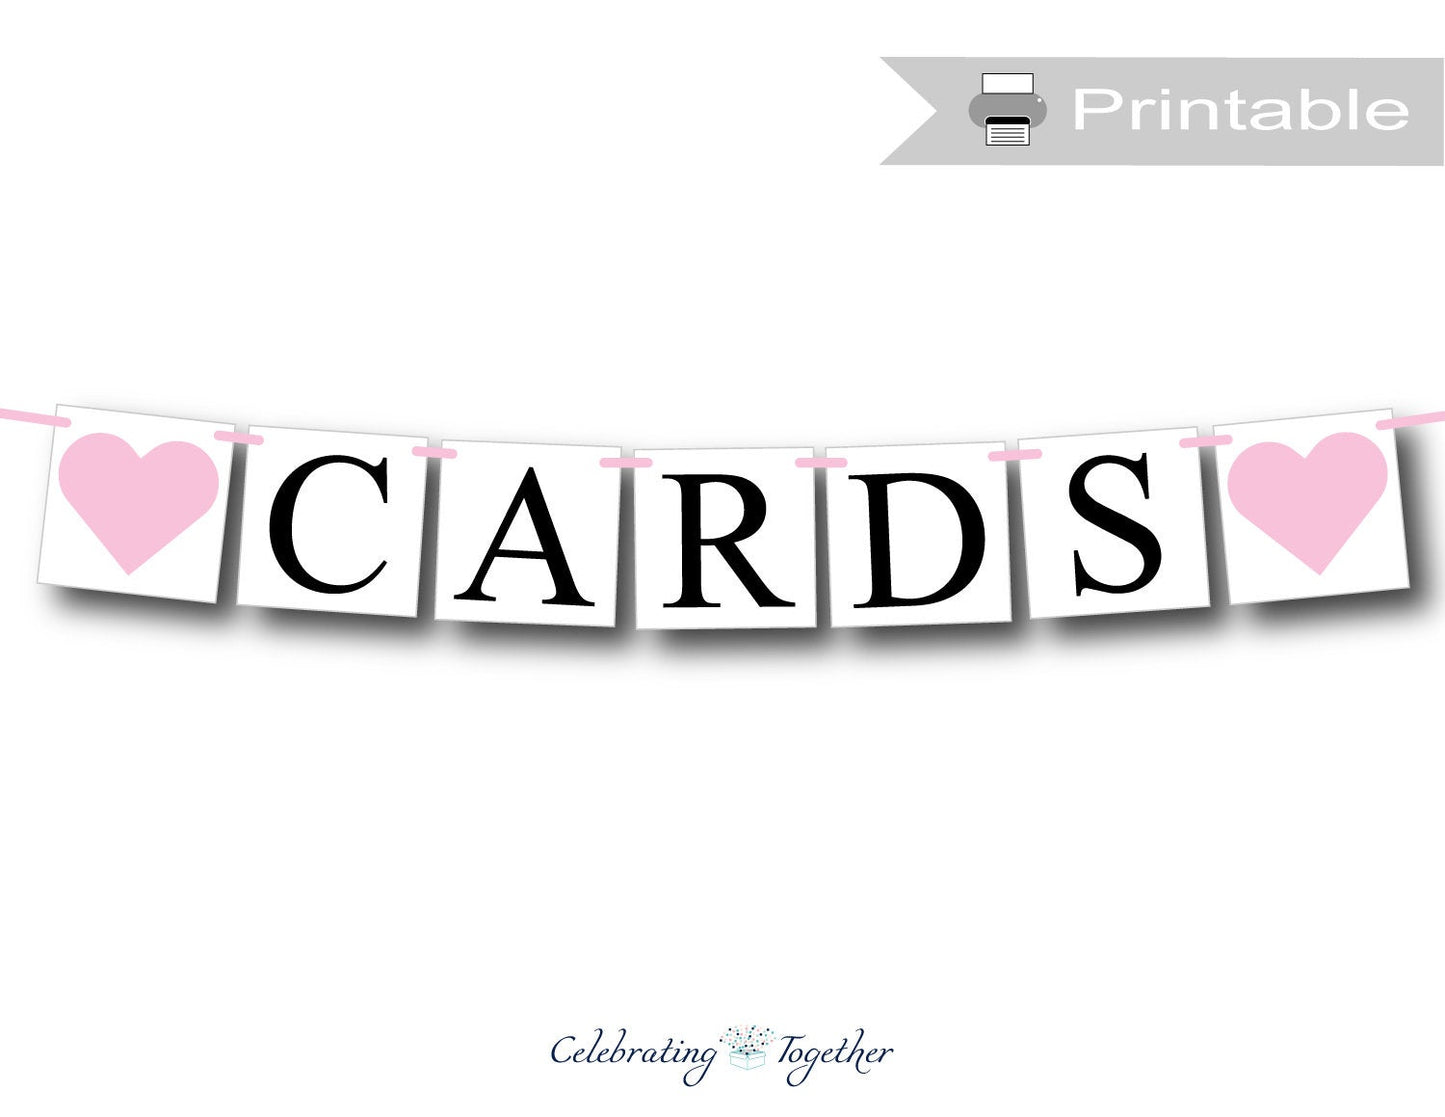 printable cards banner with hearts for baby shower decorations - Celebrating Together